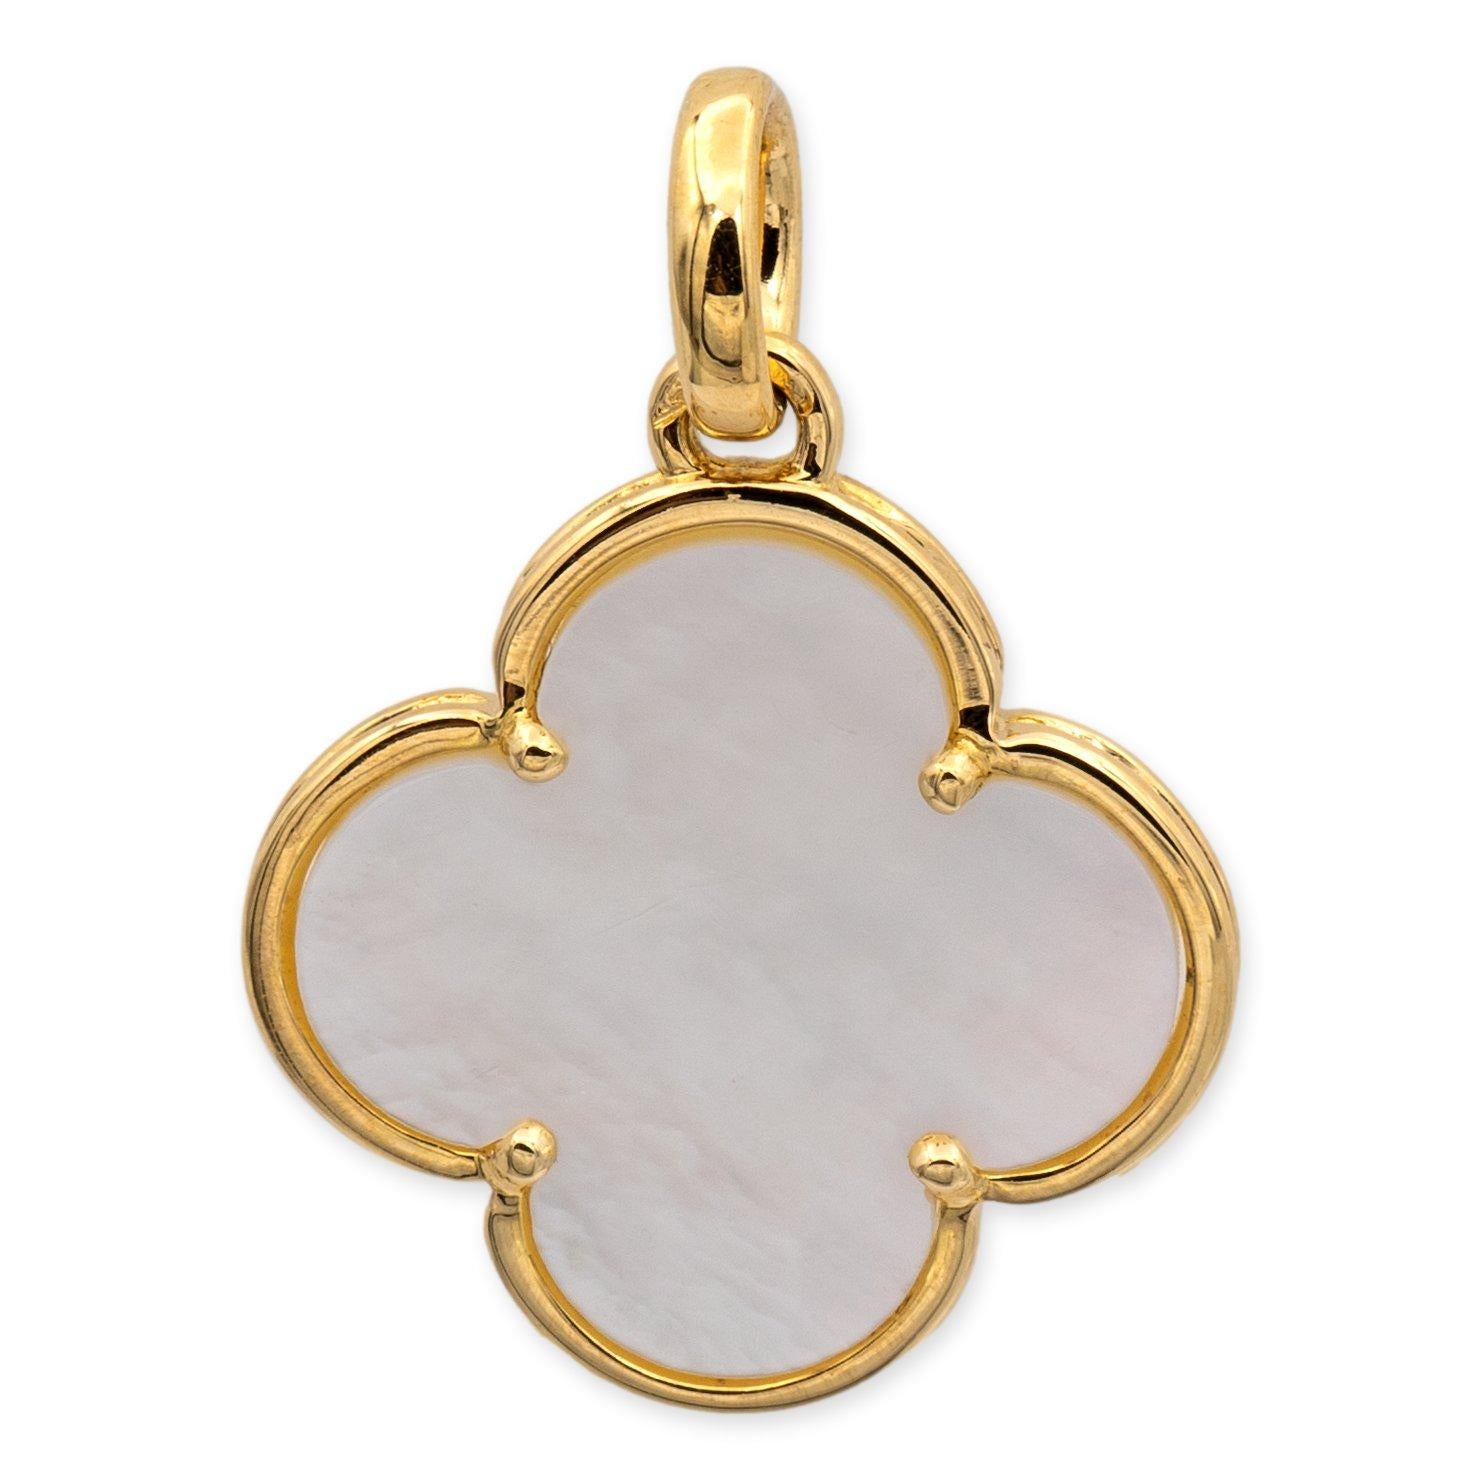 Van Cleef & Arpels pendant from the Pure Alhambra collection finely crafted in 18 karat yellow gold featuring a clover mother of pearl inlaid center with yellow gold frame hanging off round link bail. This is a large model measuring 26 mm, made in